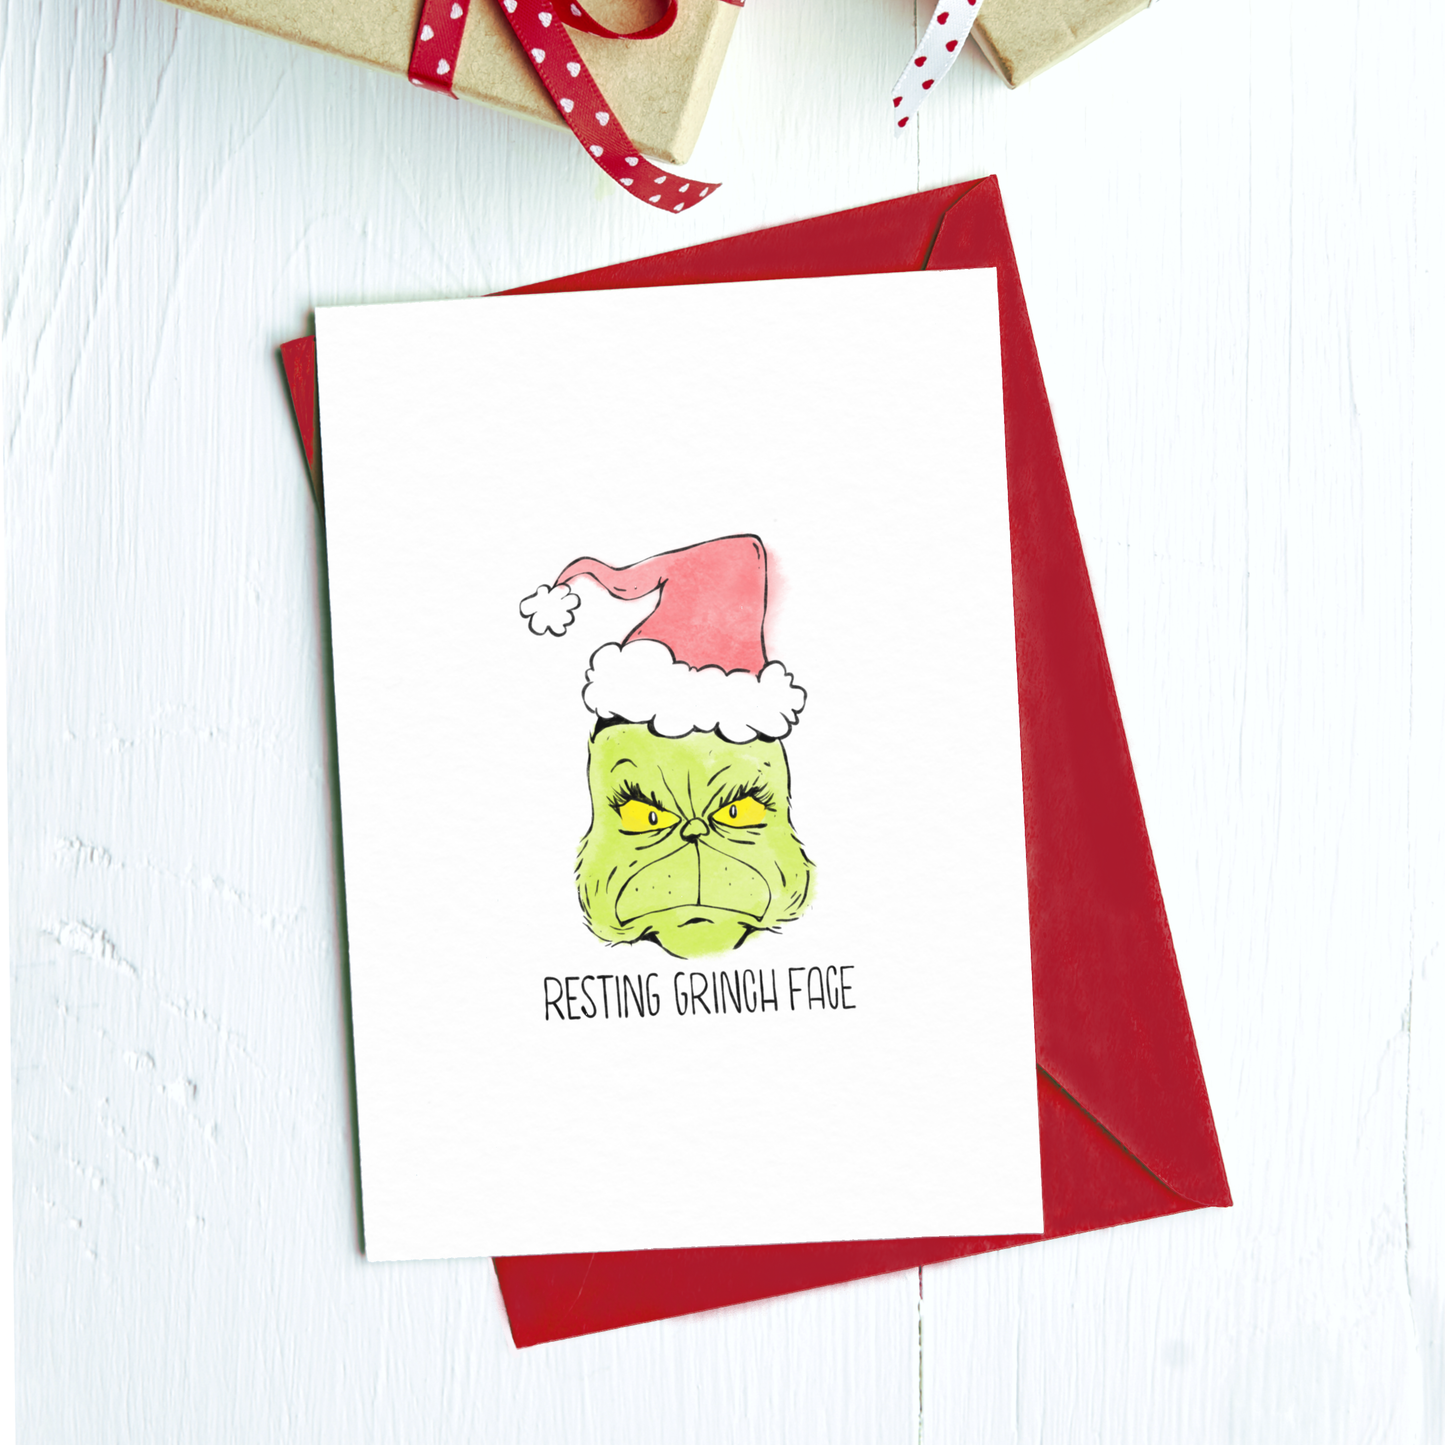 Resting Grinch Face Greeting Card